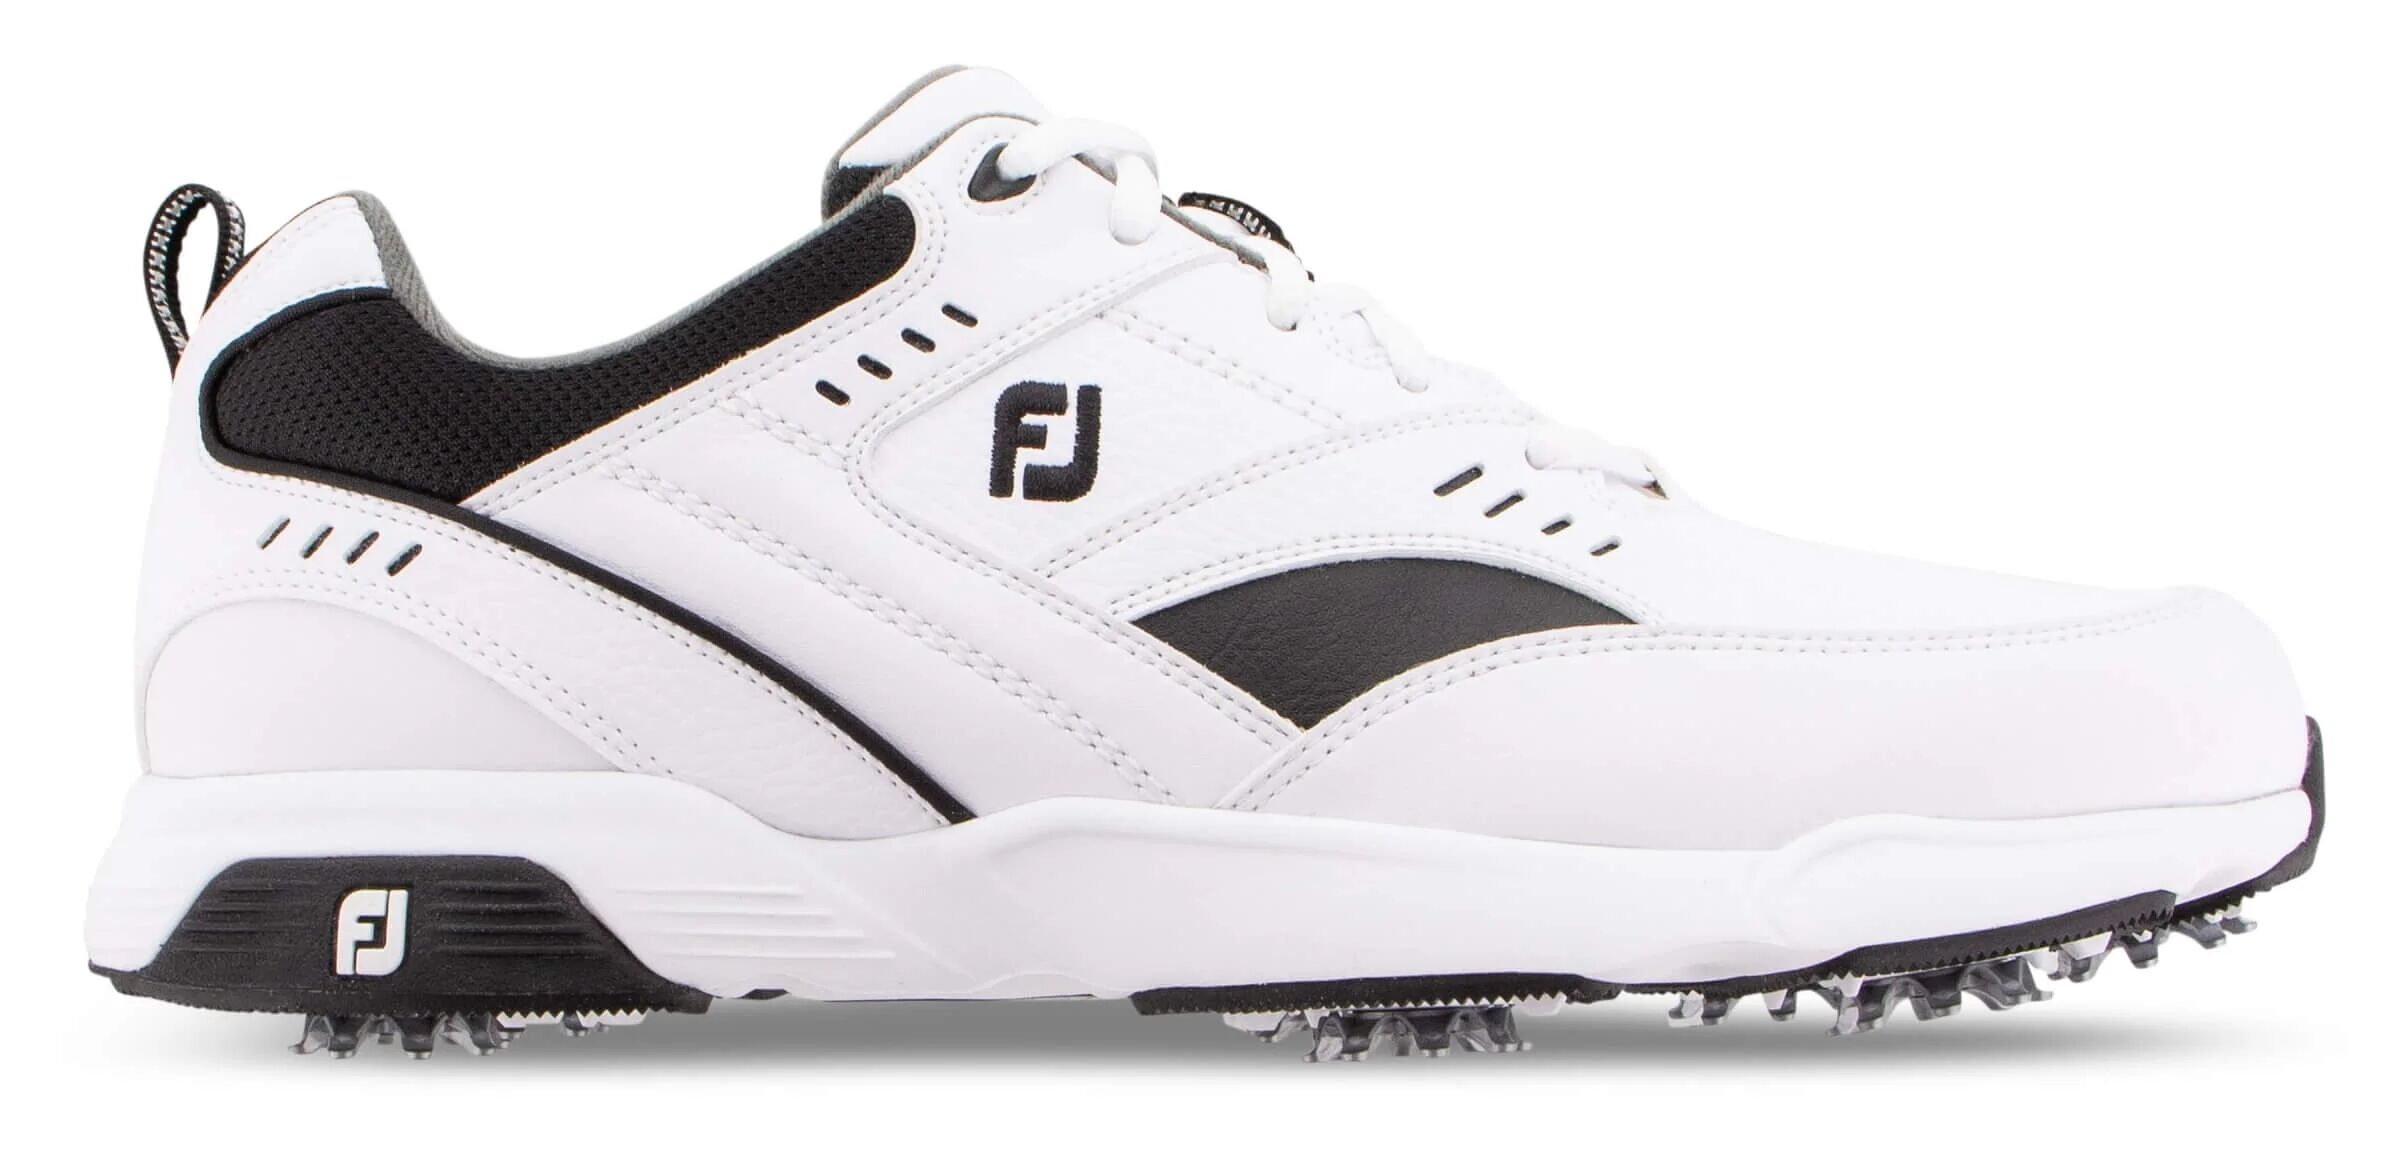 FootJoy Athletic Specialty Golf Shoes White -  - 12 - W